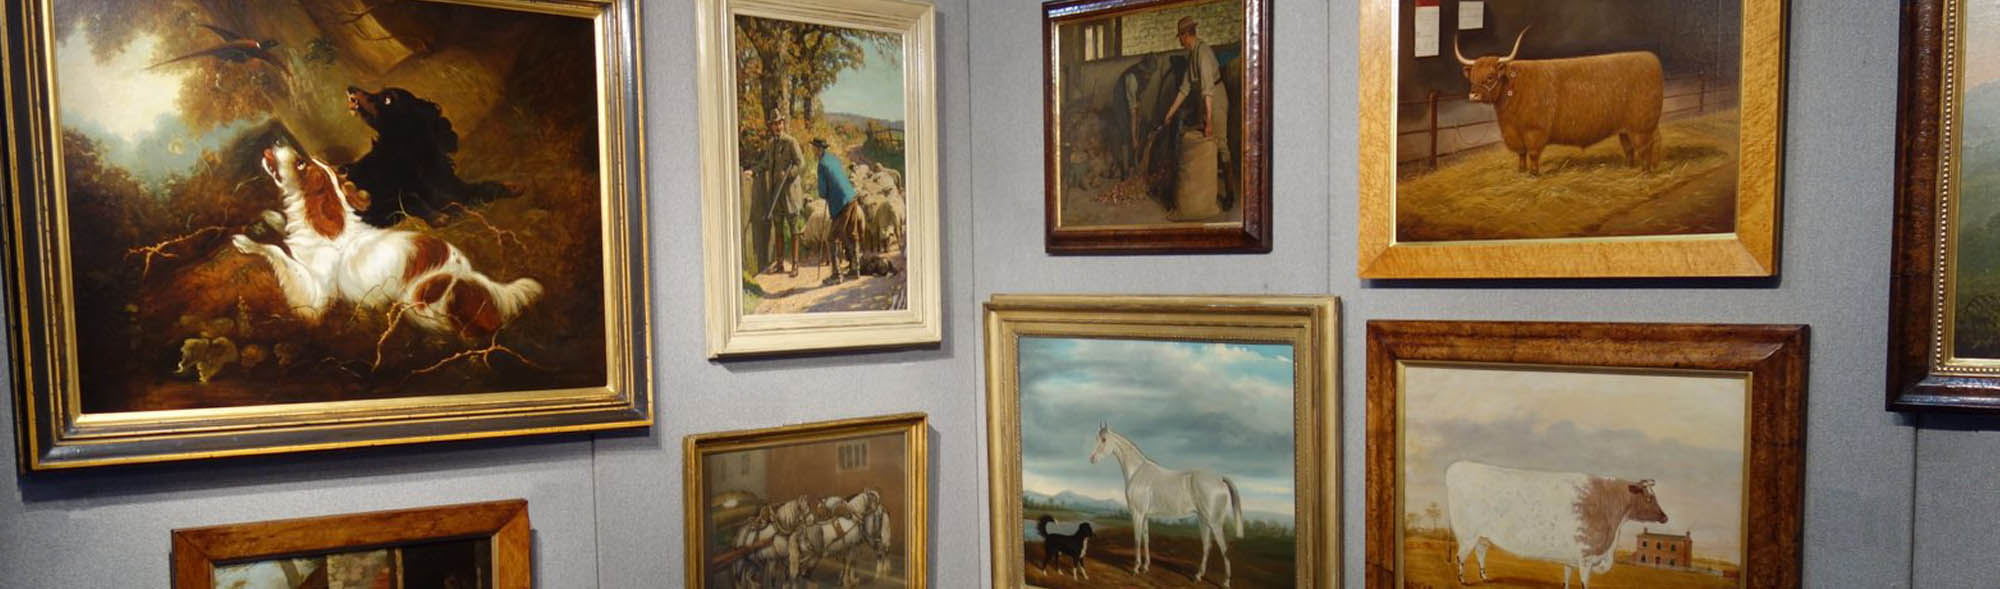 Blackbrook Gallery home of 19th century art painting portraits